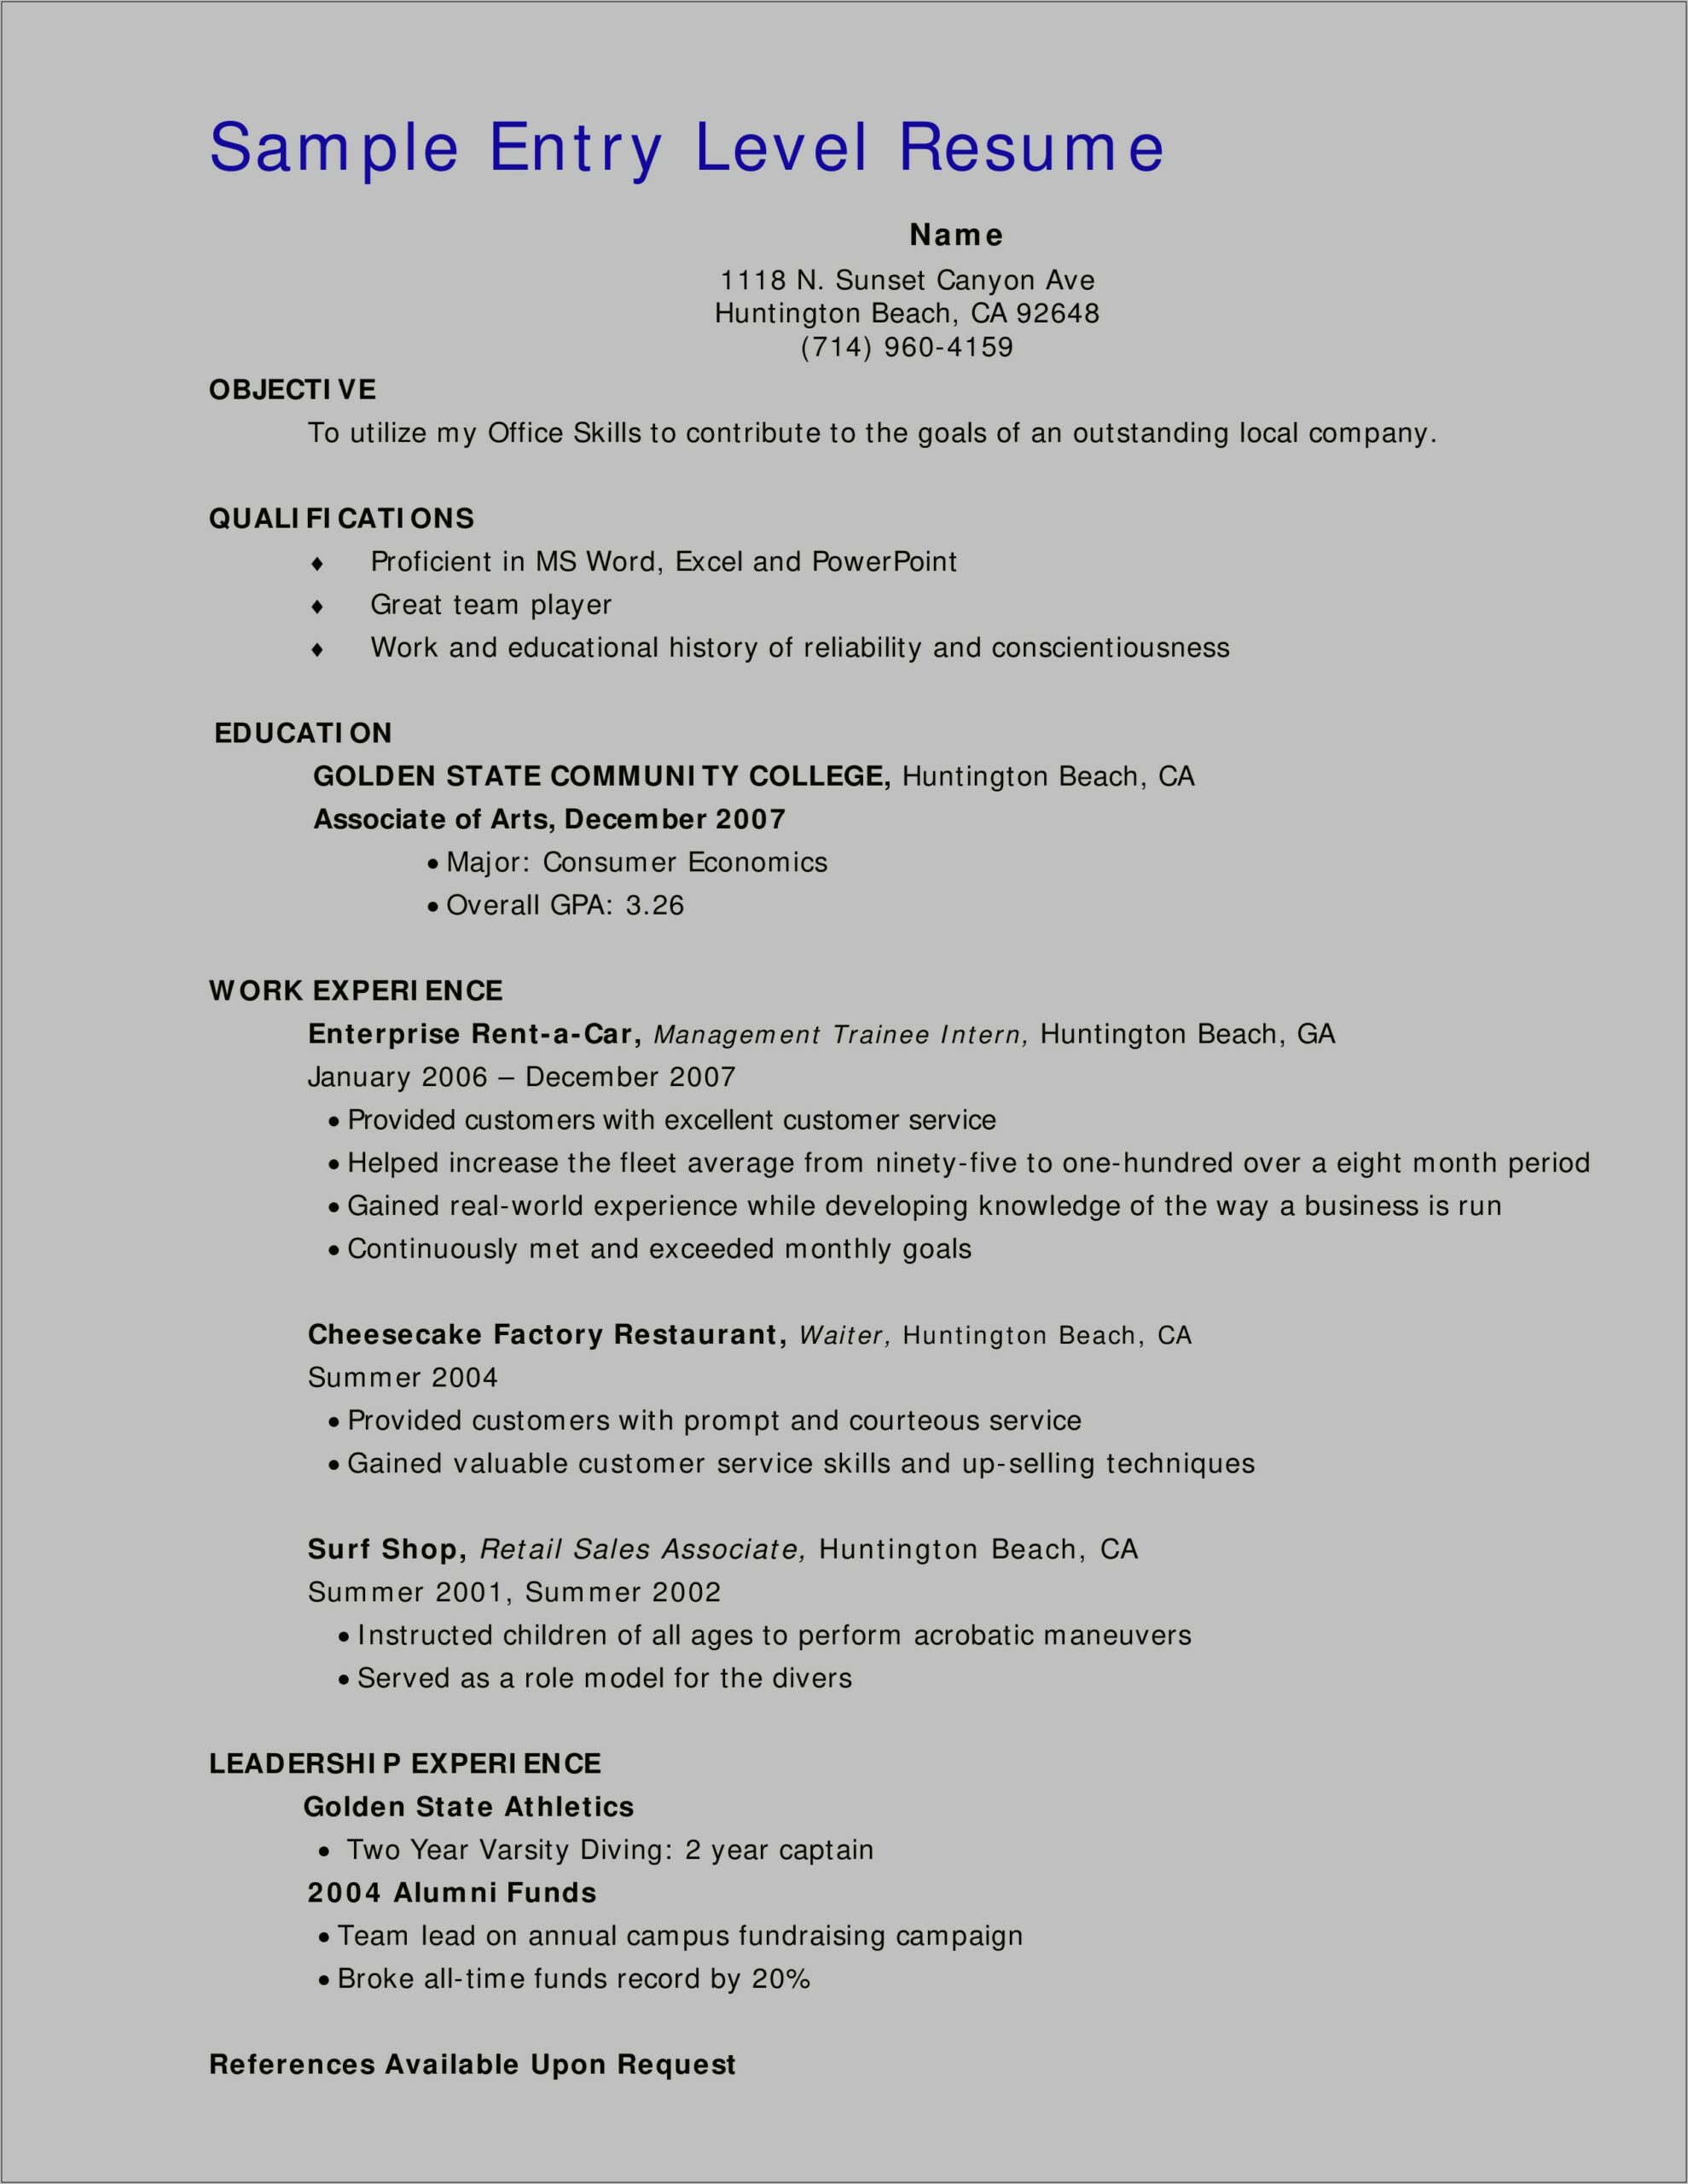 Sample Resume Objectives For Entry Level Retail